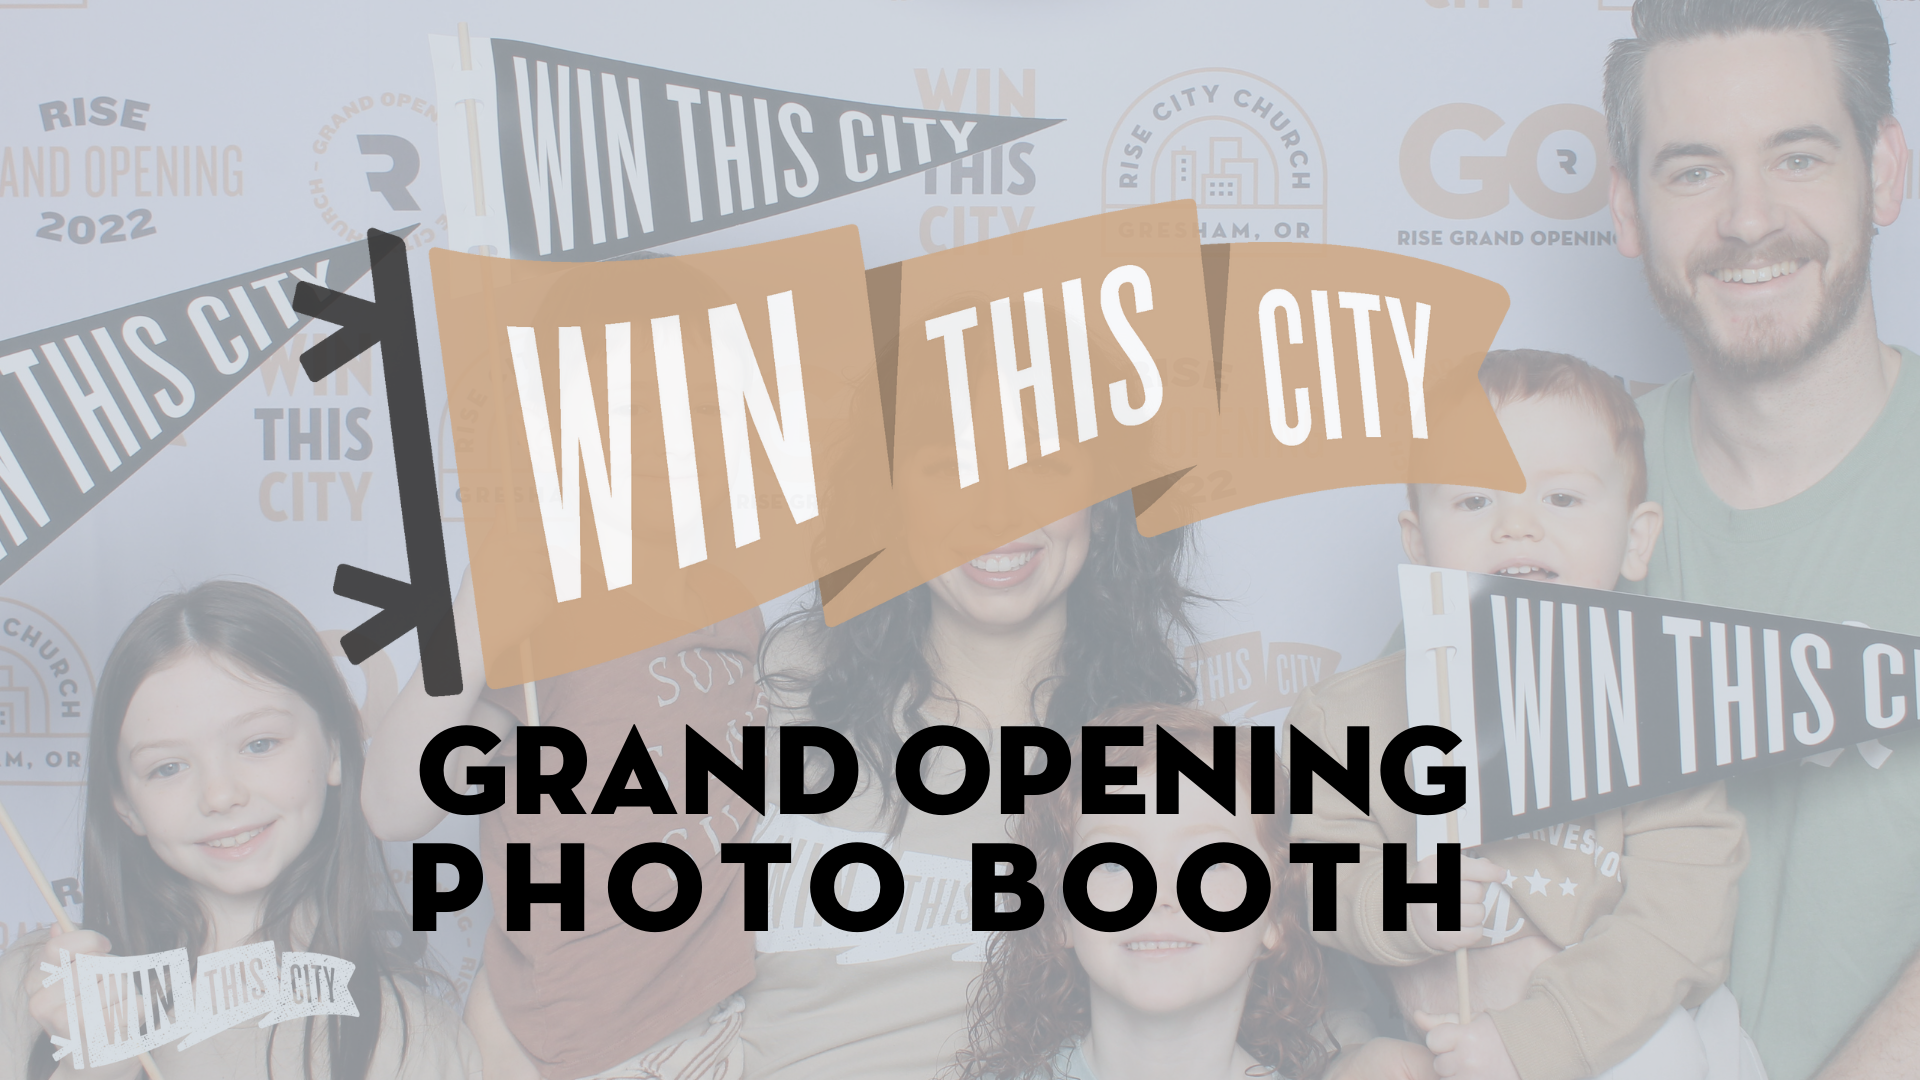 Grand Opening Photo Booth